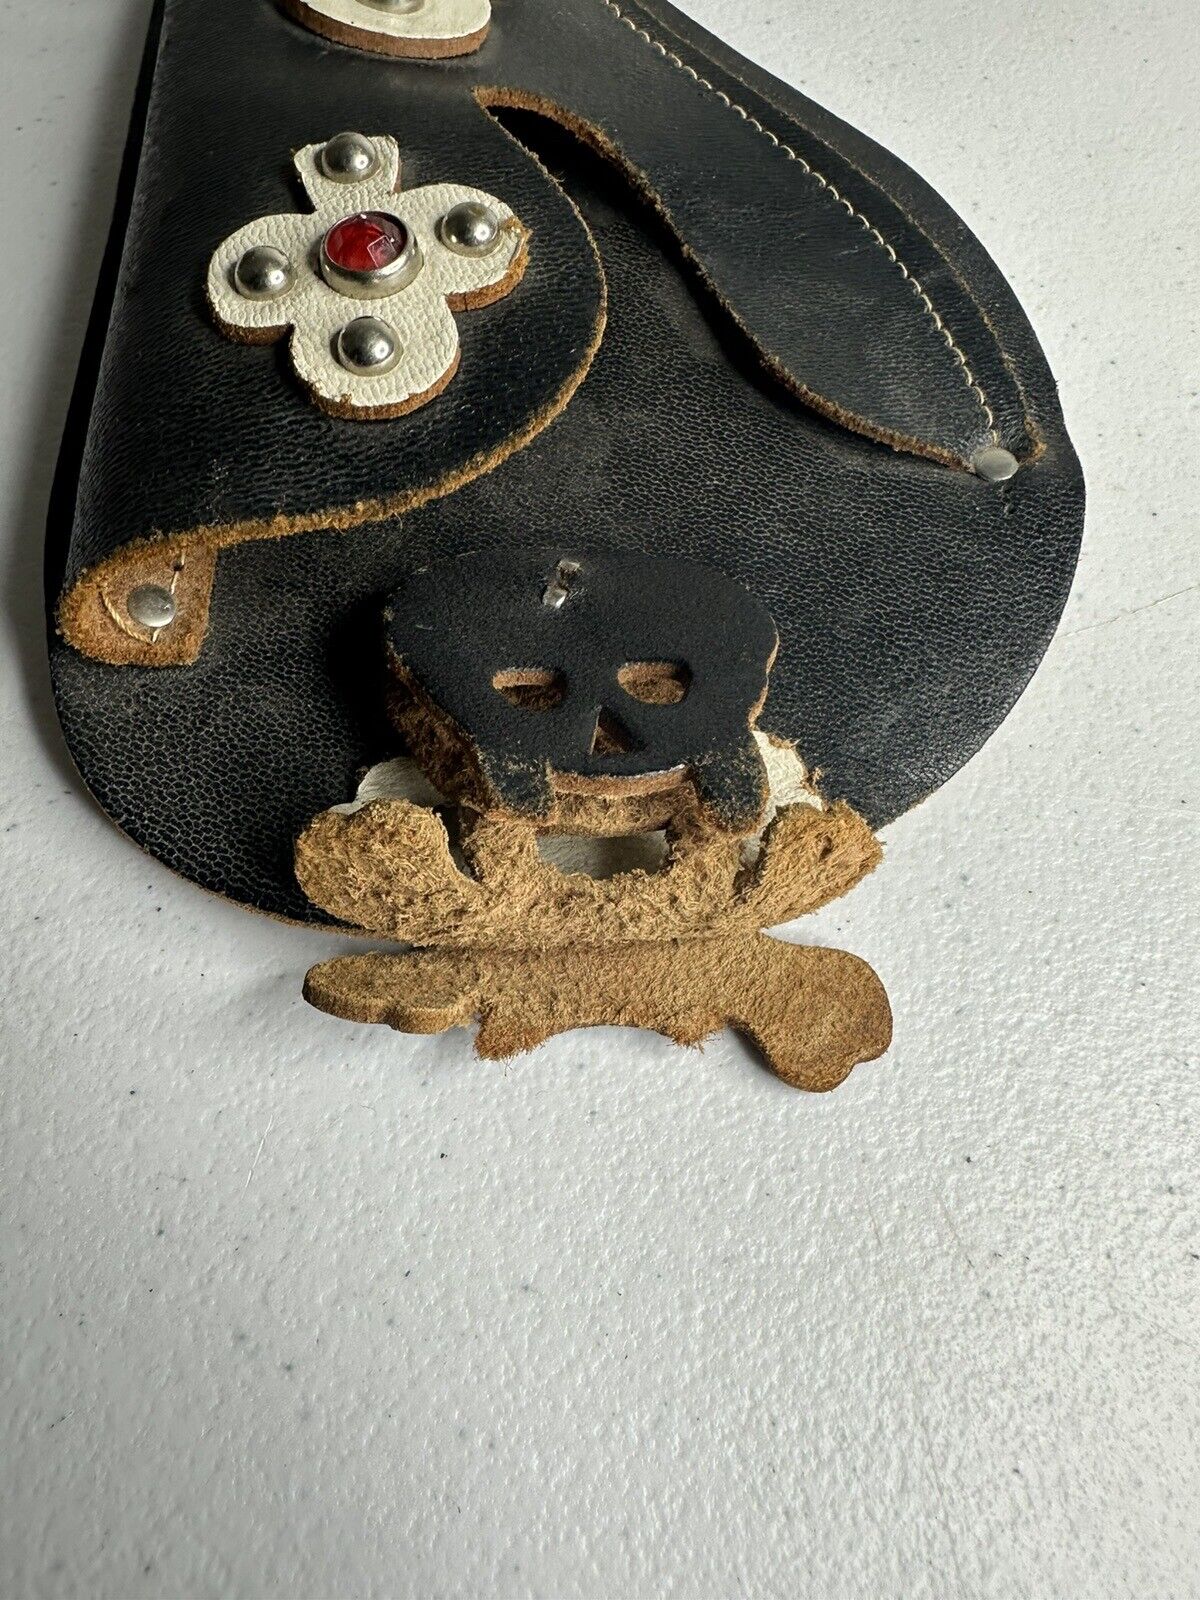 Vintage 1940s Wyandotte Pressed Steel Clicker Toy Gun with Skull and Crossbones Holster - 9.5 Inch Collectible - TreasuTiques